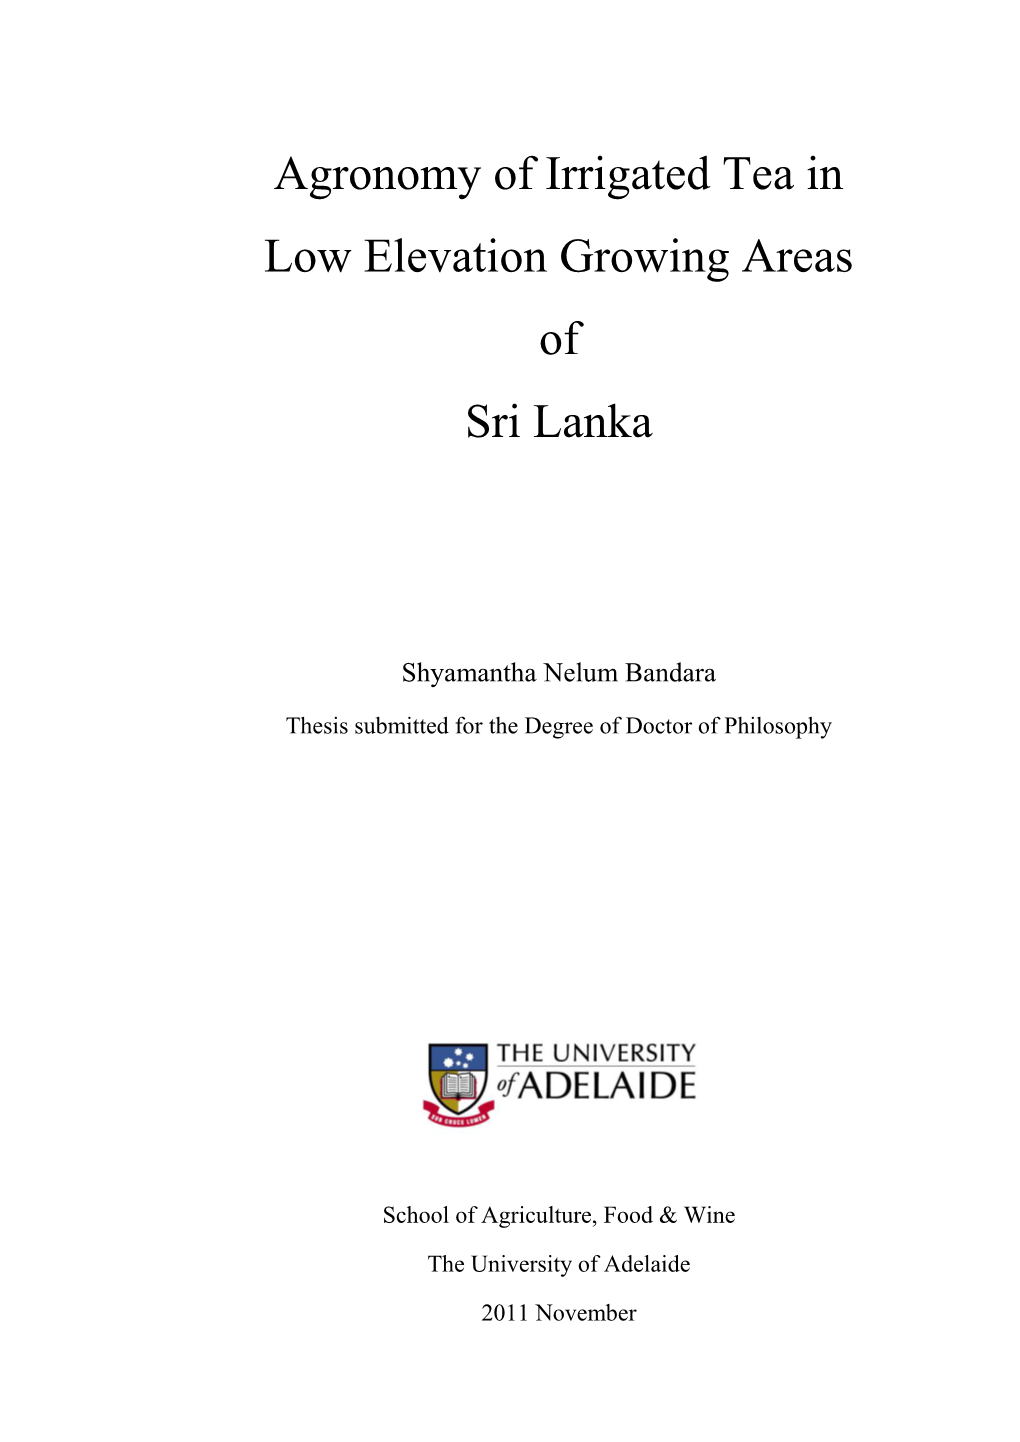 Agronomy of Irrigated Tea in Low Elevation Growing Areas of Sri Lanka